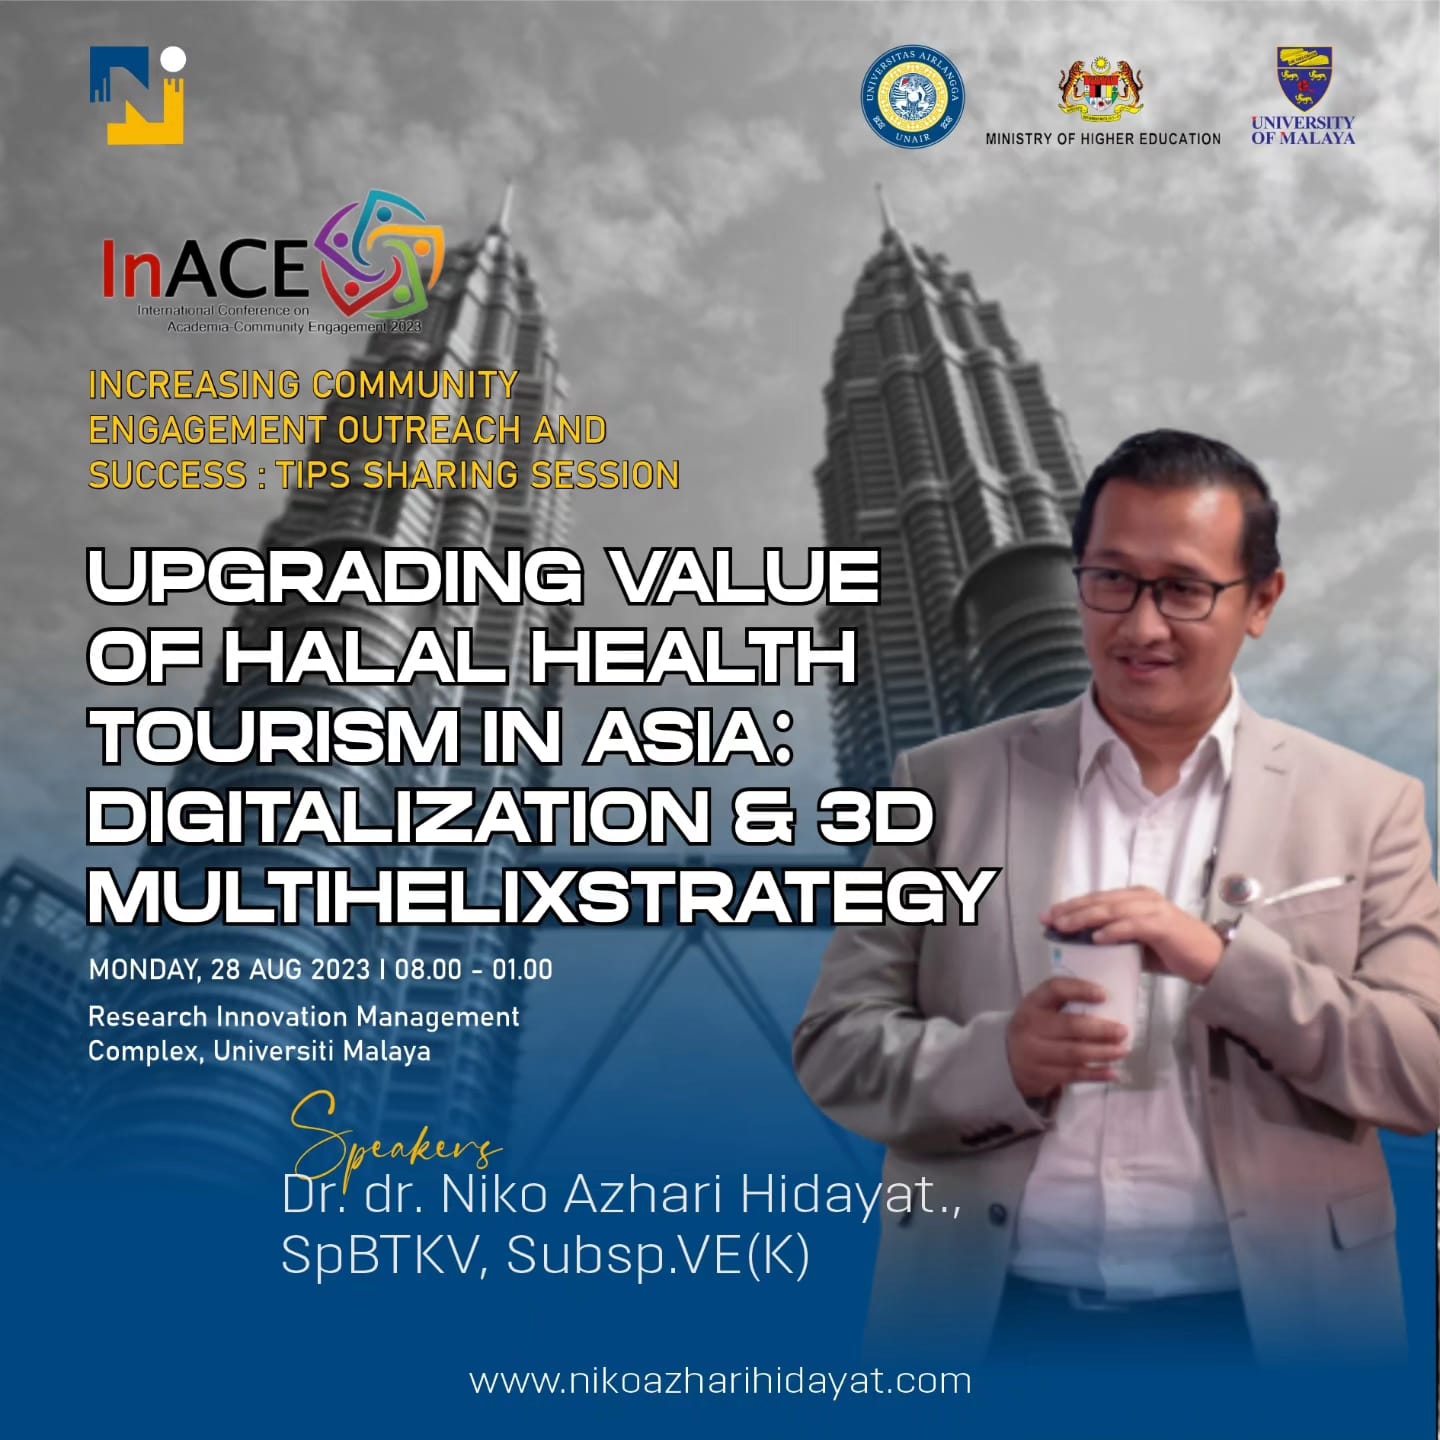 Empowering HALAL HEALTH TOURISM in InACE 2023